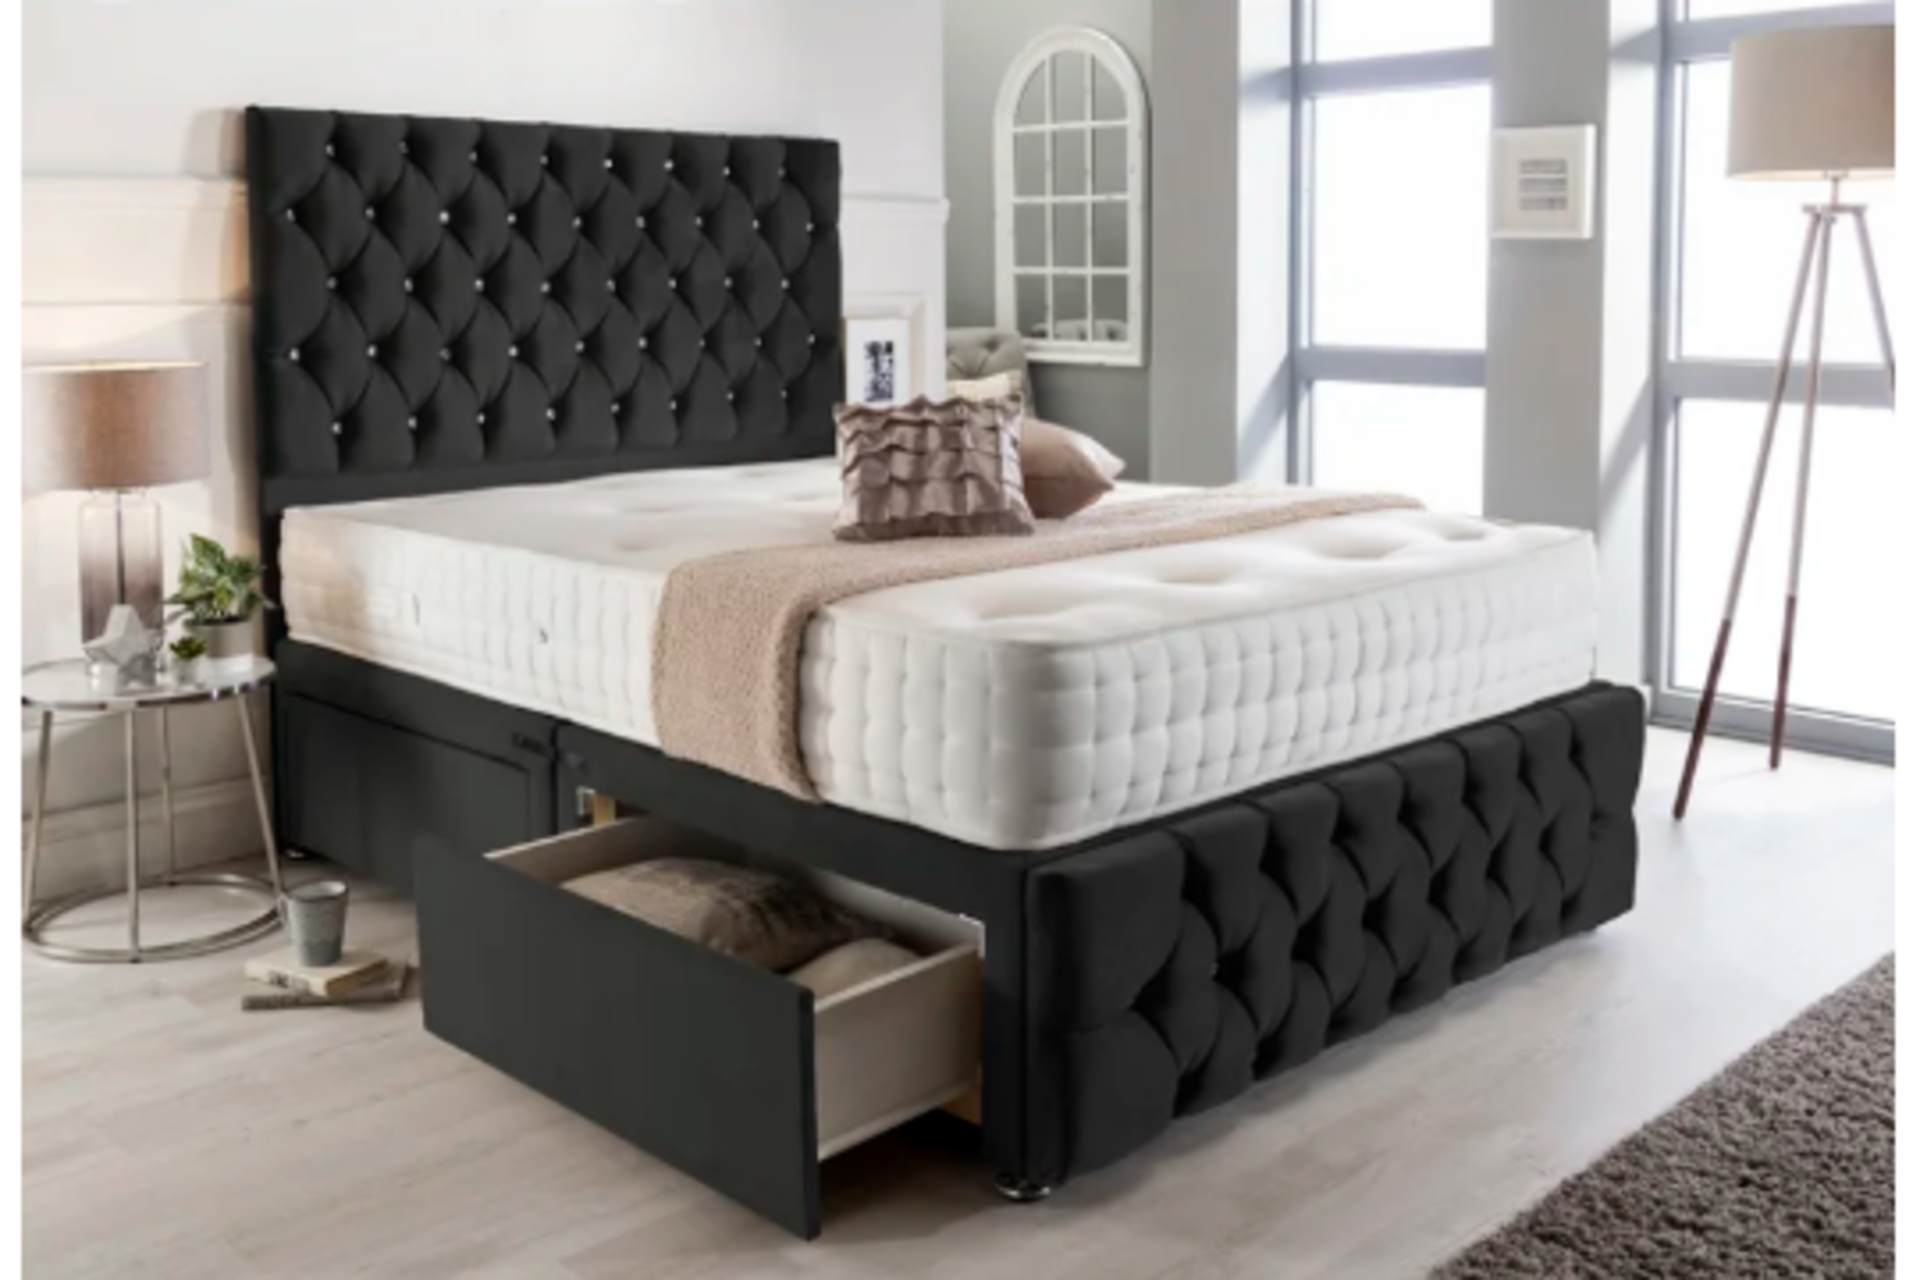 Mcintyre Luxury Suede Divan Bed. RRP £449.99. 5ft. The divan base is made from sturdy pine with a